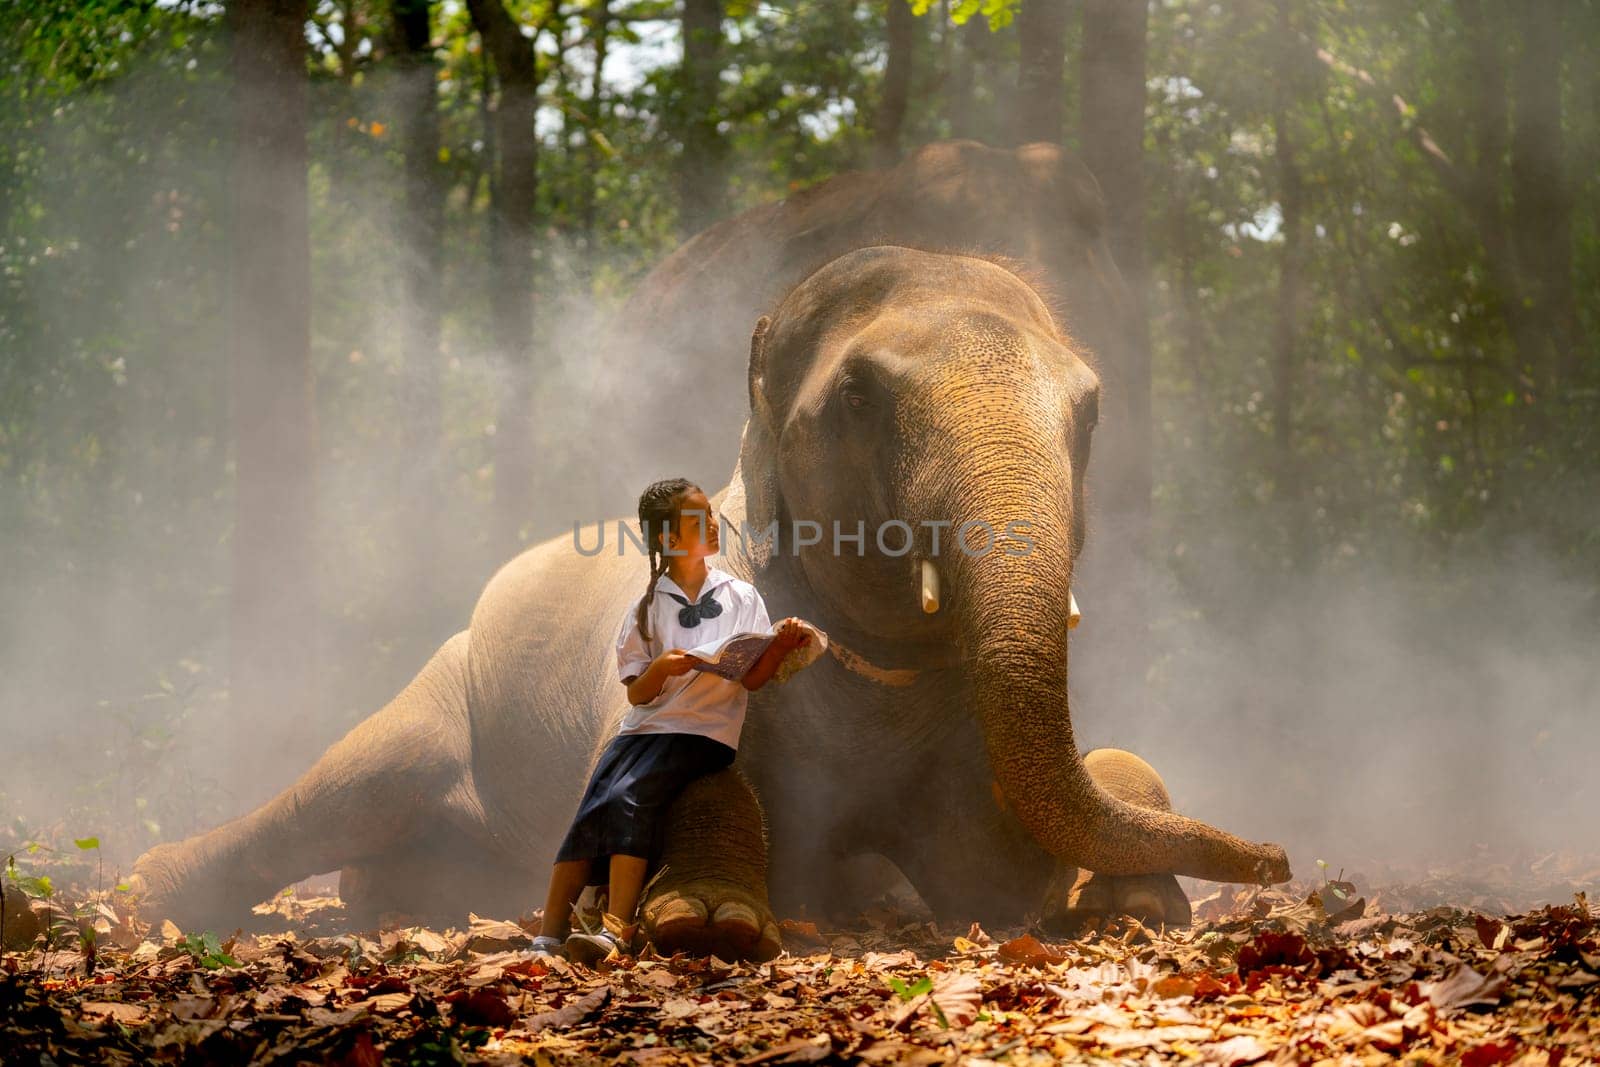 Asian girl hold book and sit on leg of elephant and also look at elephant in concept of good relation between human and animal.